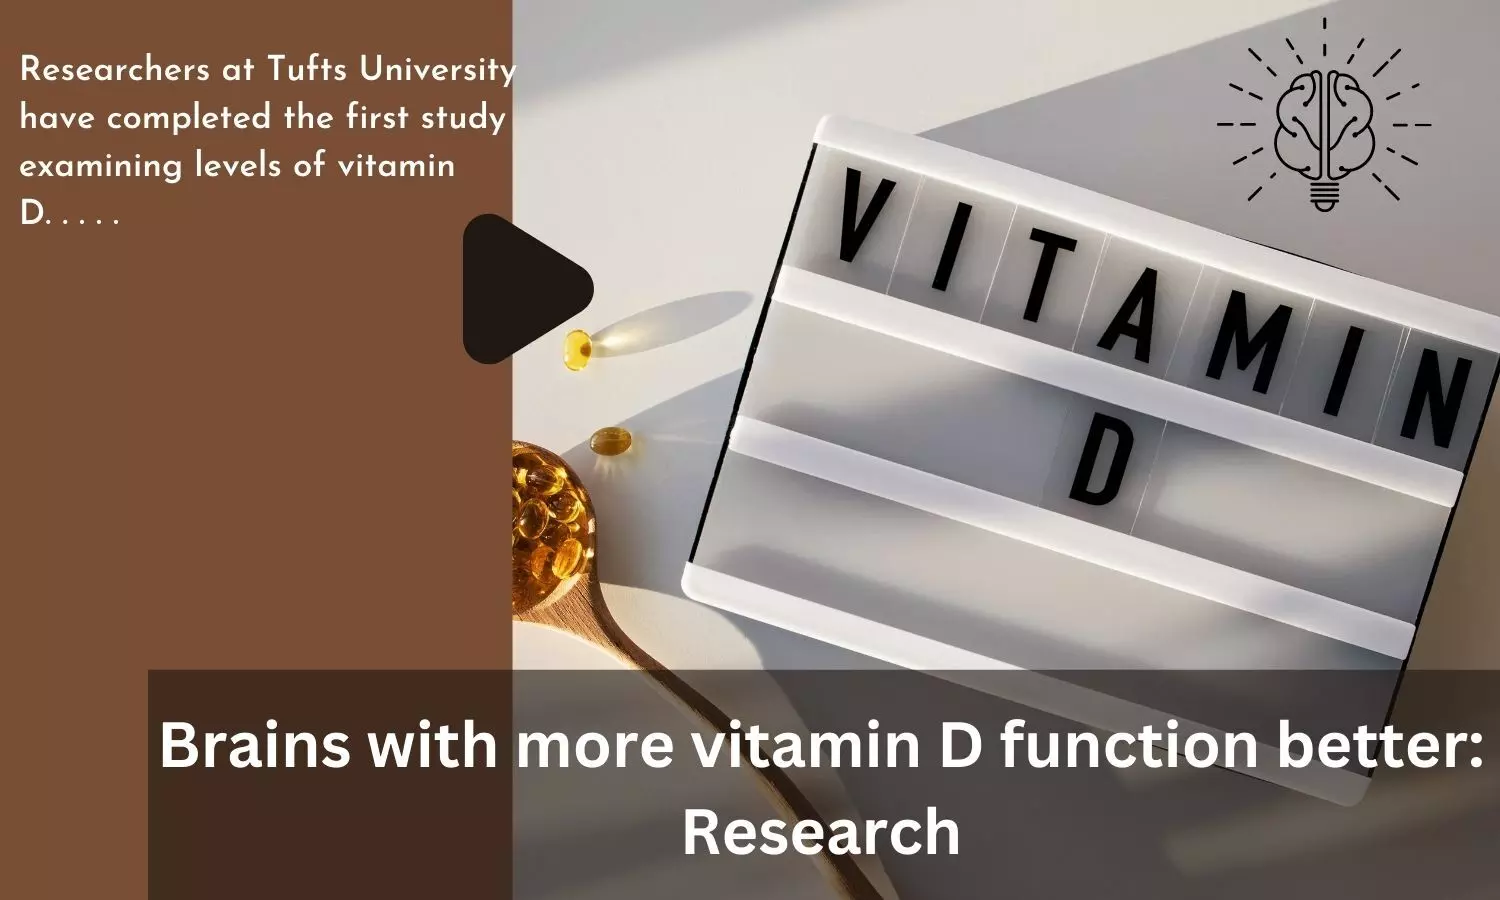 Brains with more vitamin D function better: Research